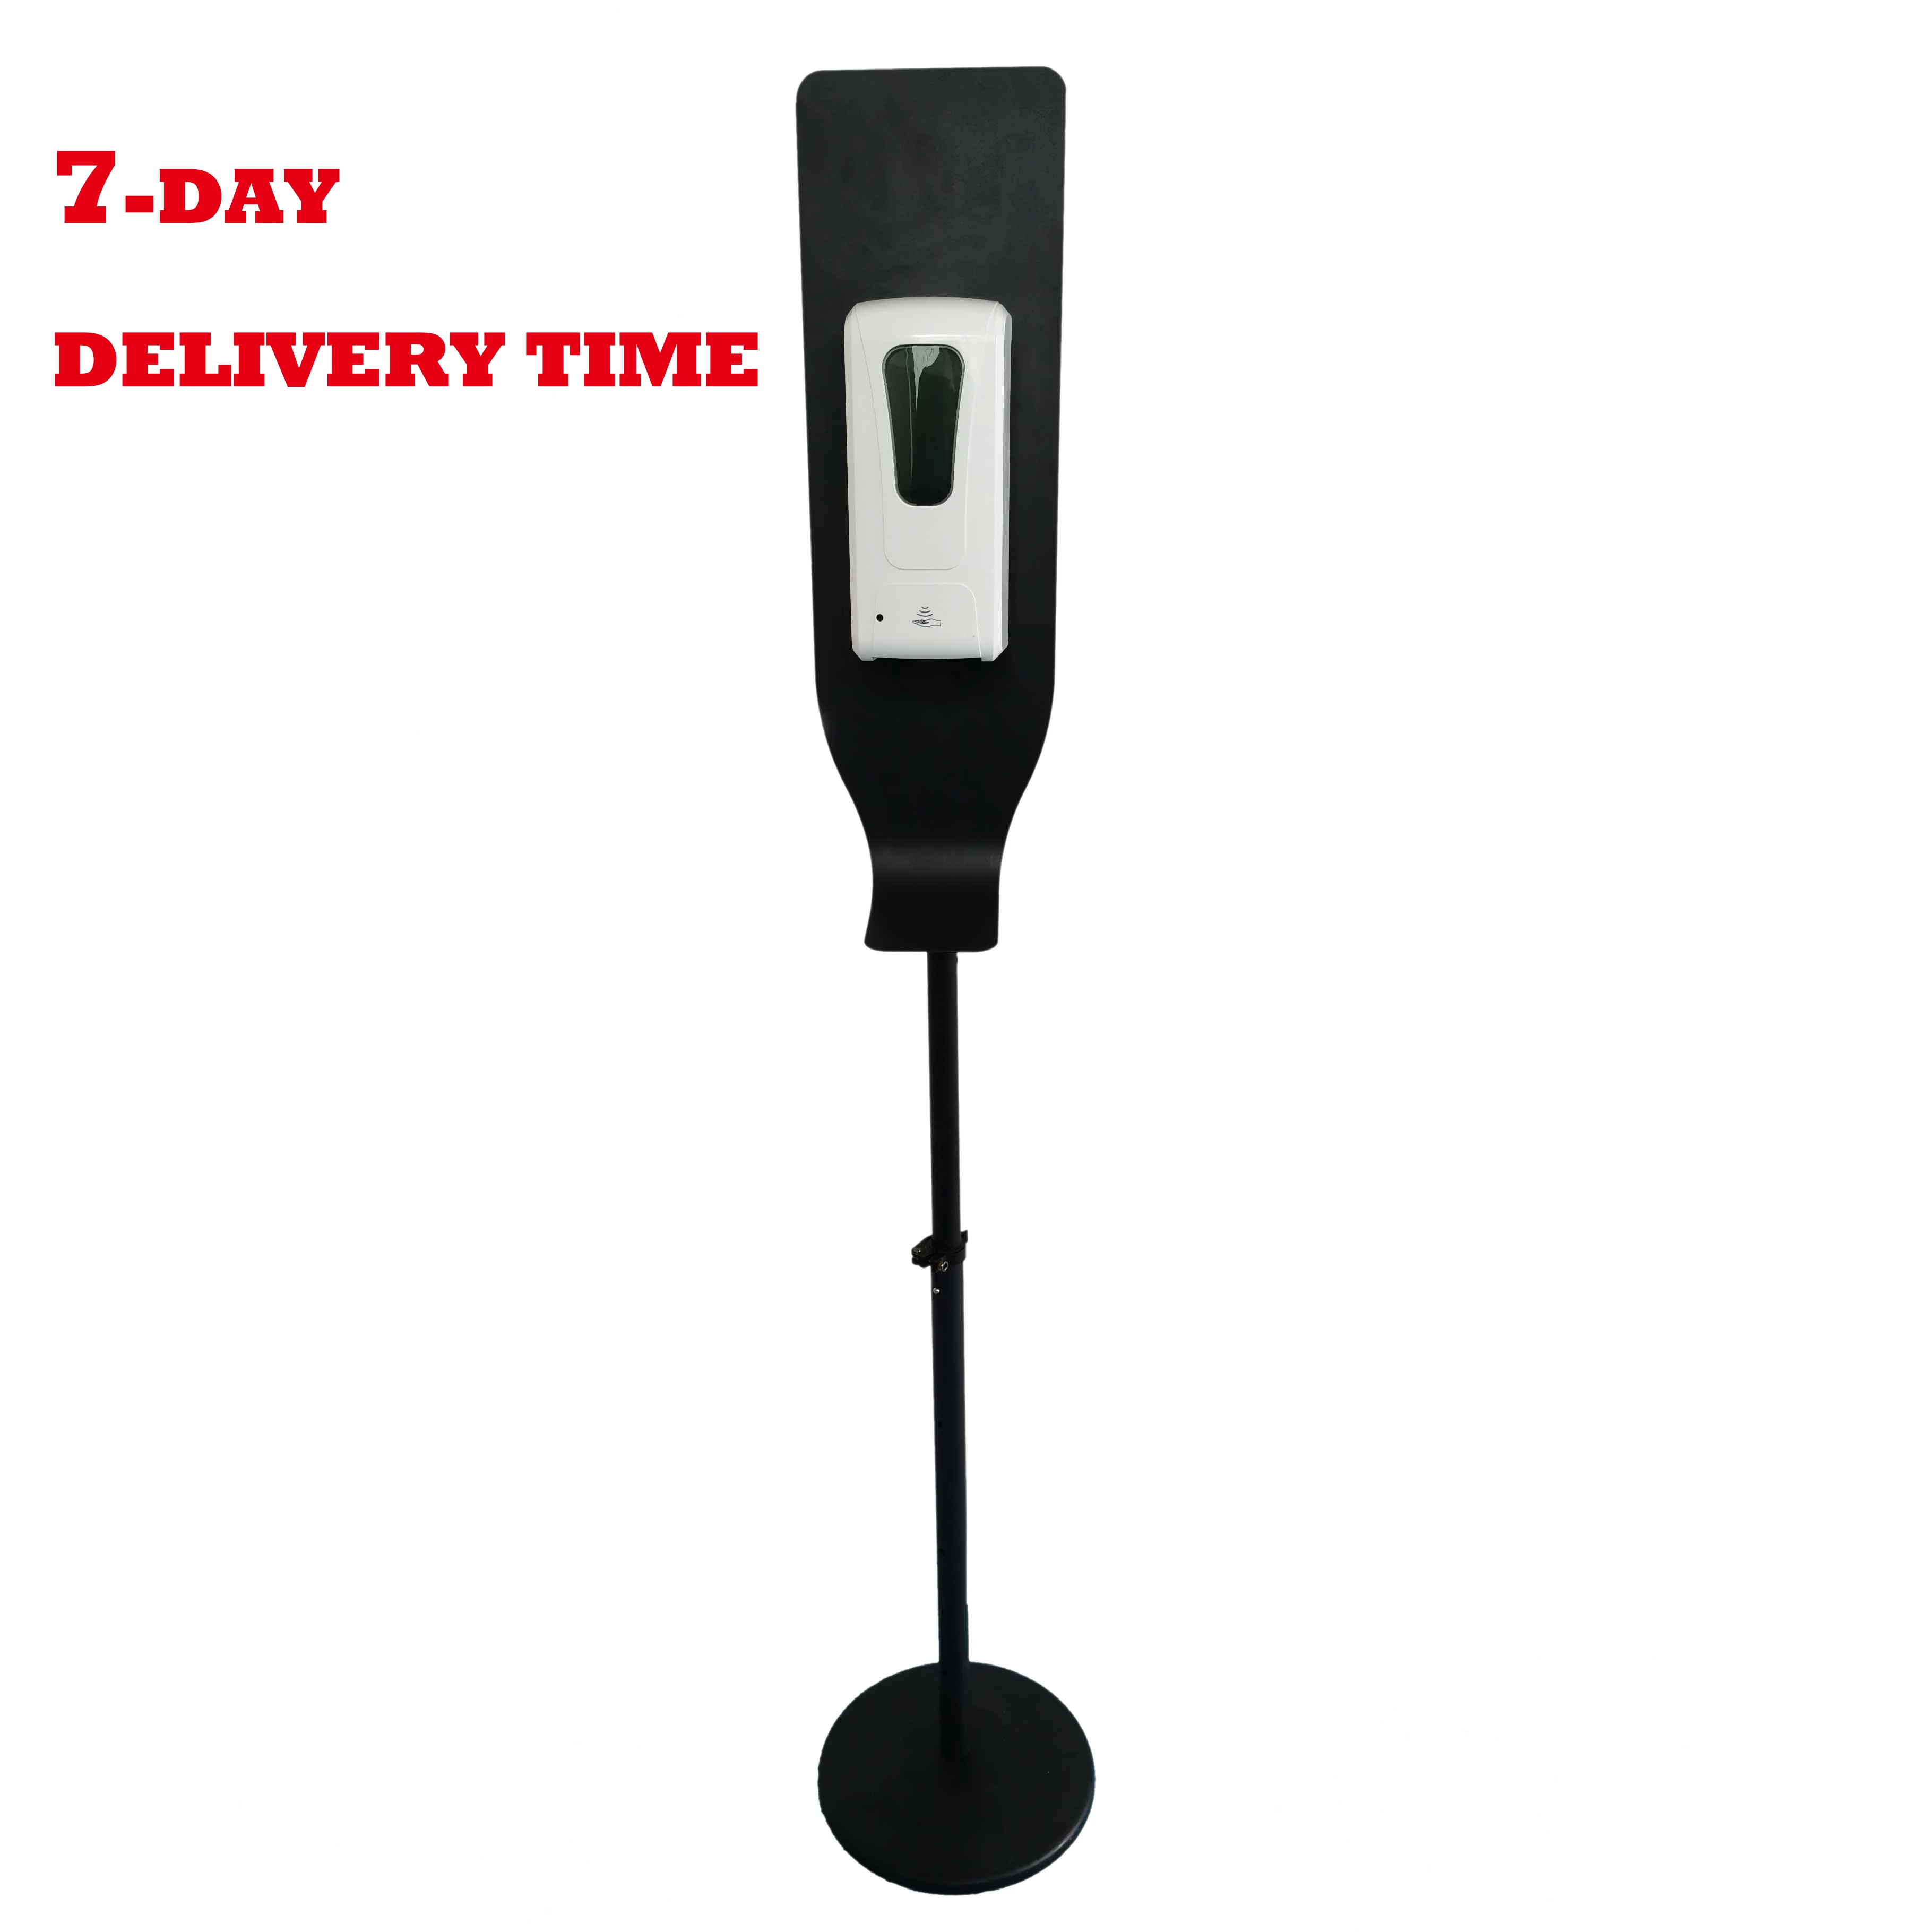 Automatic soap dispenser gel/touchless hand sanitizer dispenser/gel dispenser stand with sensor